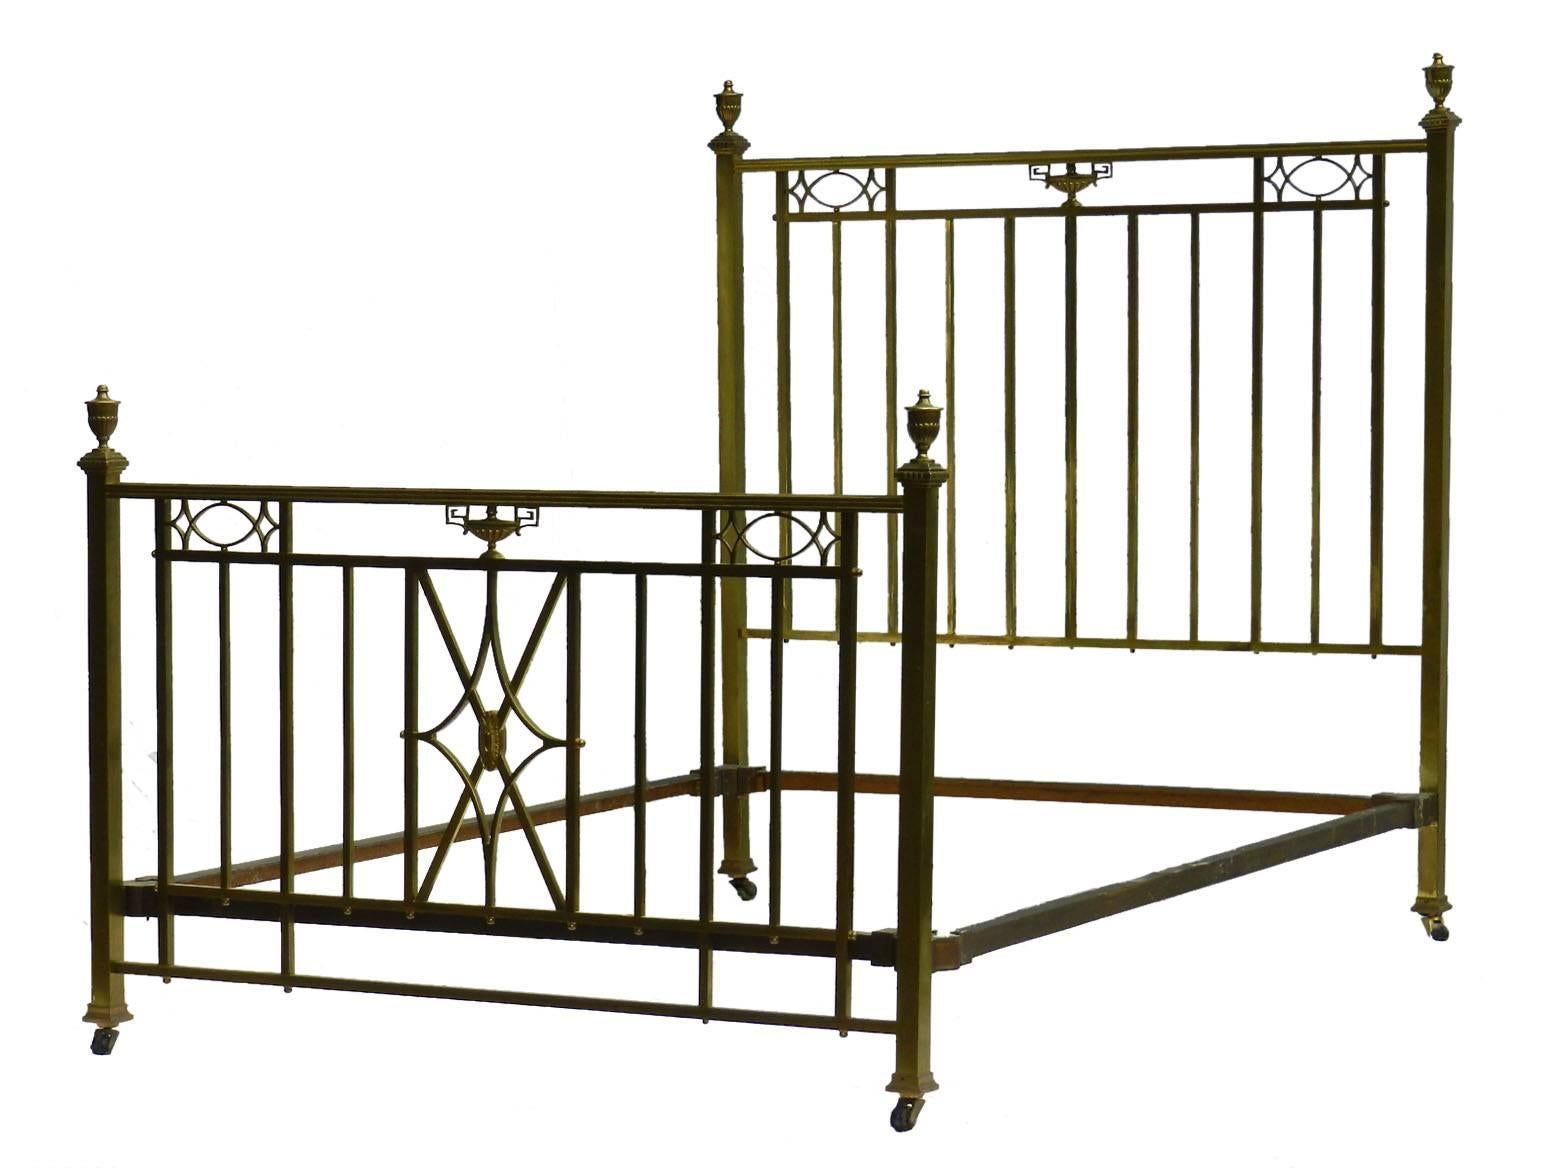 French, 19th century Empire brass bed
Rare US Queen UK King-size
Internal measurements to use with a standard base and mattress please ask if you need more info always happy to help
Width 150cm (60ins), length 202cm (81ins)
This bed frame dismantles